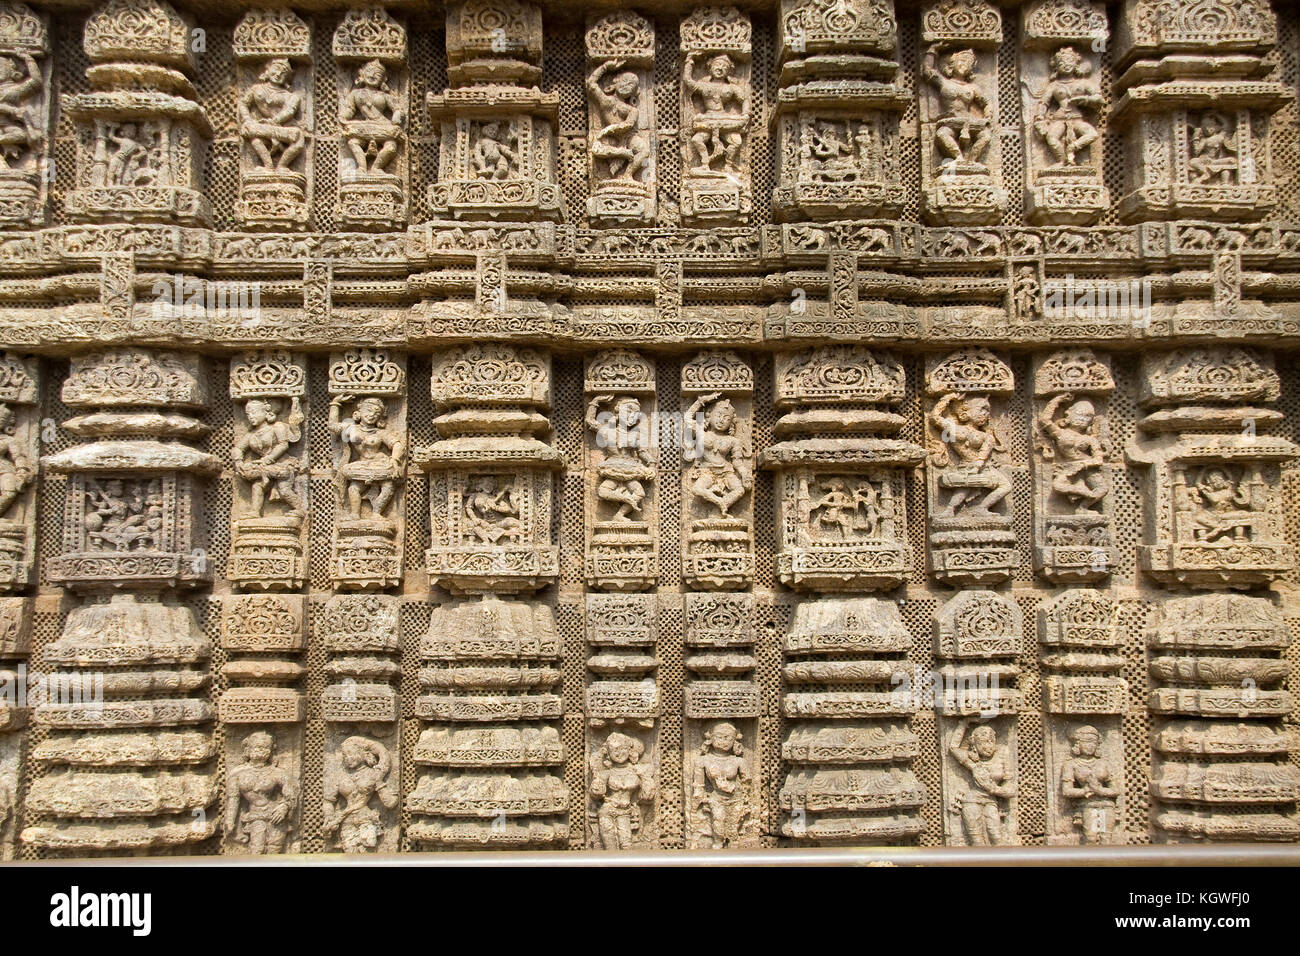 Depiction of various music and dance poses by deft hands on wall of Sun Temple, Konark, Orissa, India, Asia Stock Photo